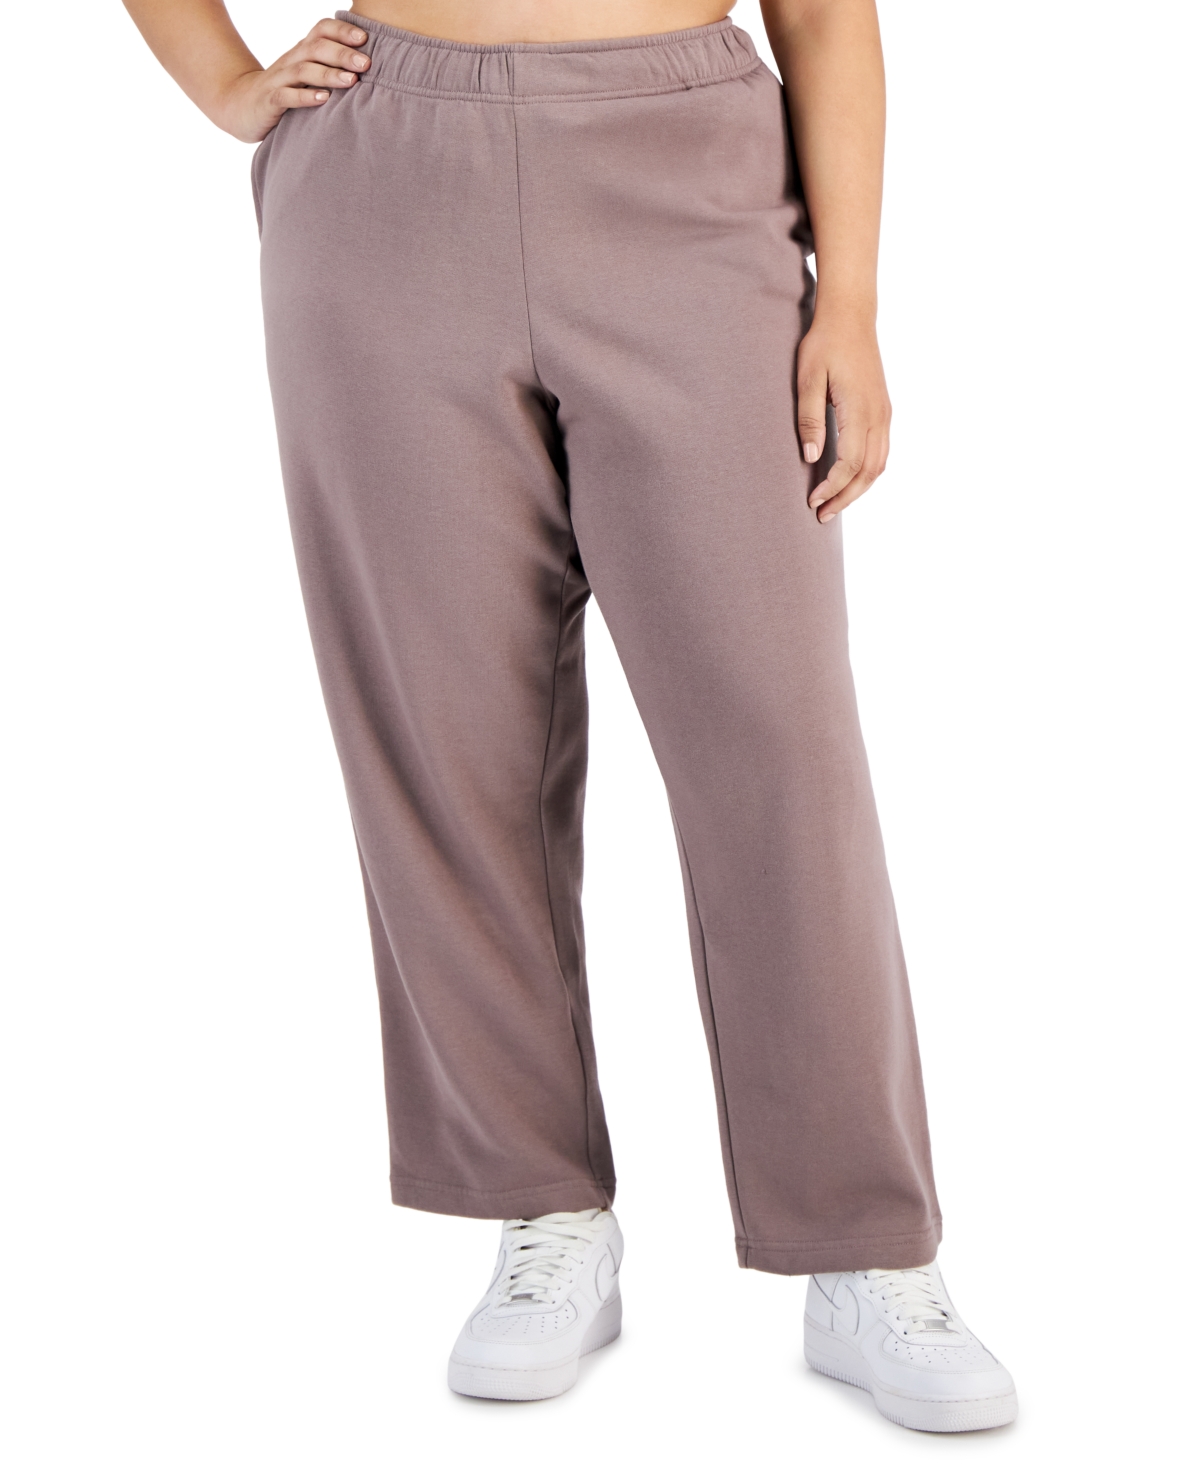 Plus Size Relaxed Mid-Rise Pull-On Fleece Pants, Created for Macy's - Cocoa Foam